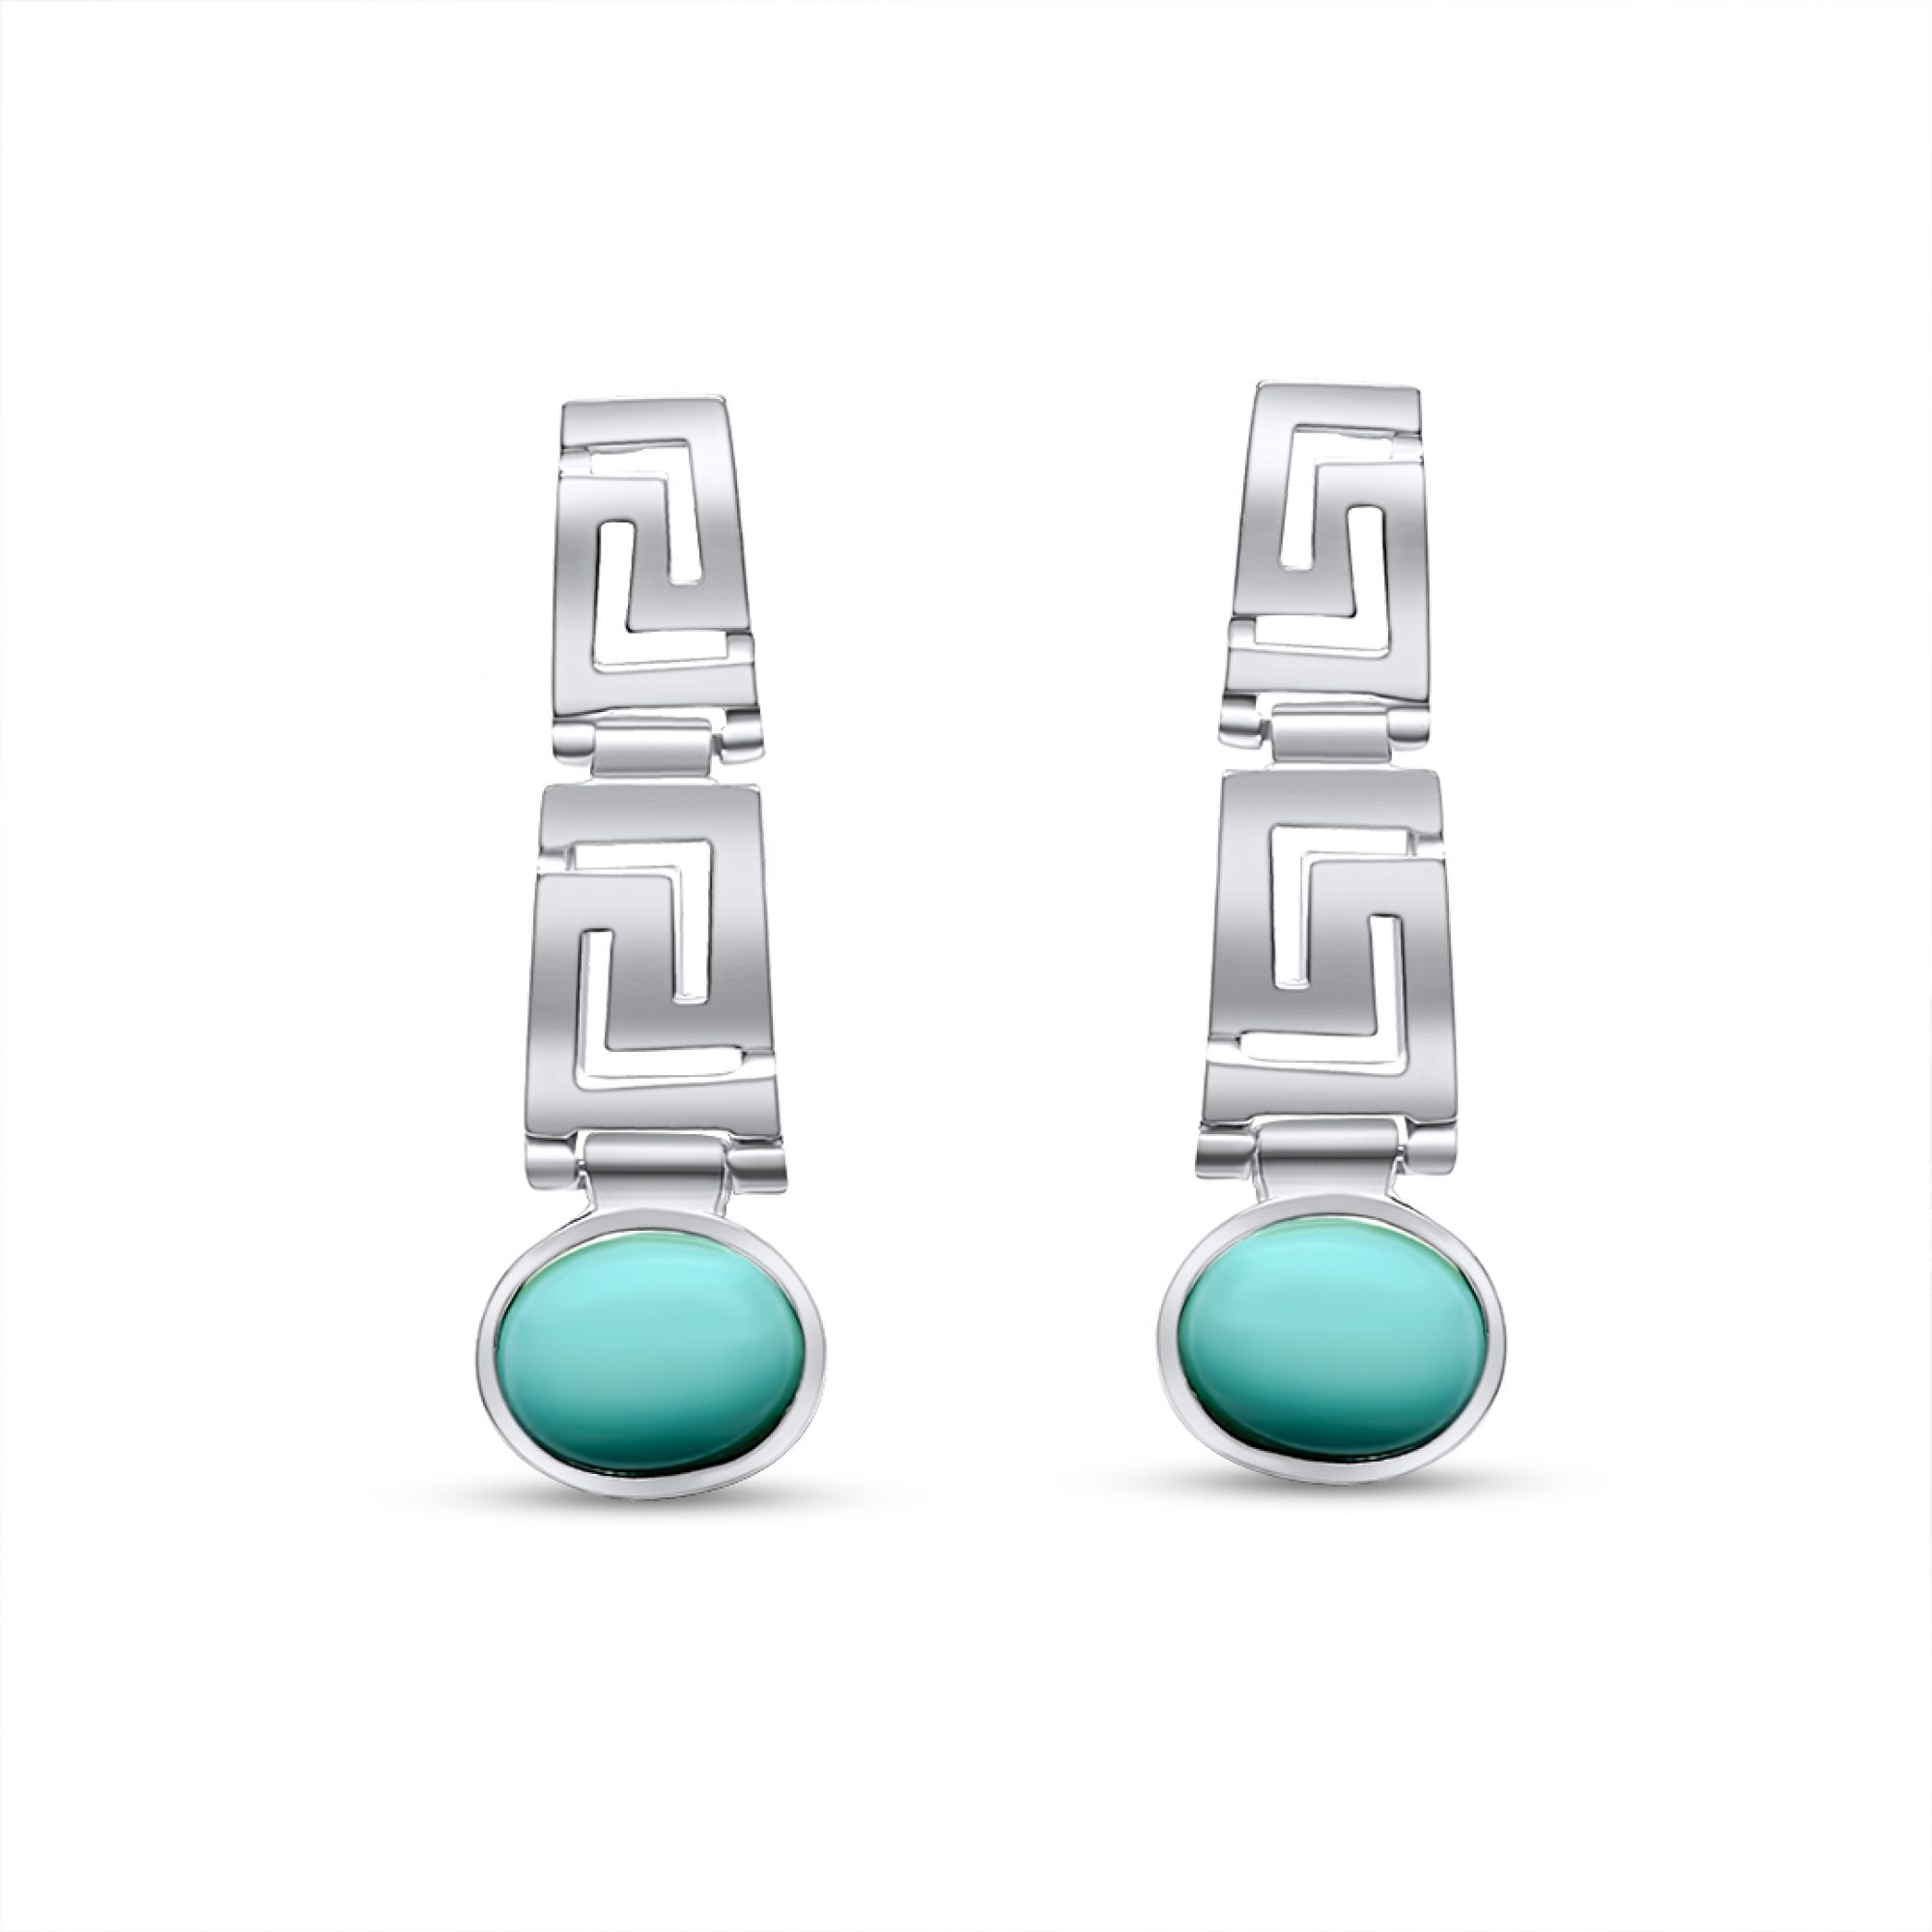 Meander earrings with turquoise stones